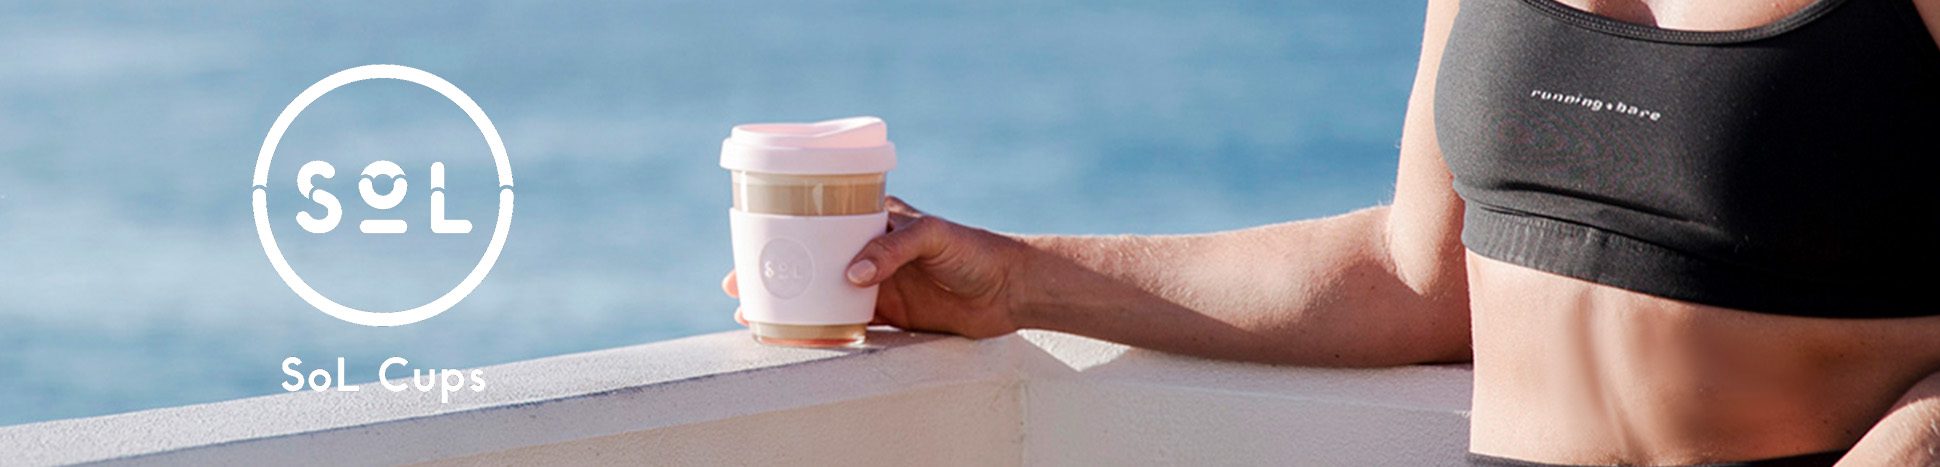 Luxah SoL Cups | Reusable Coffee Cups